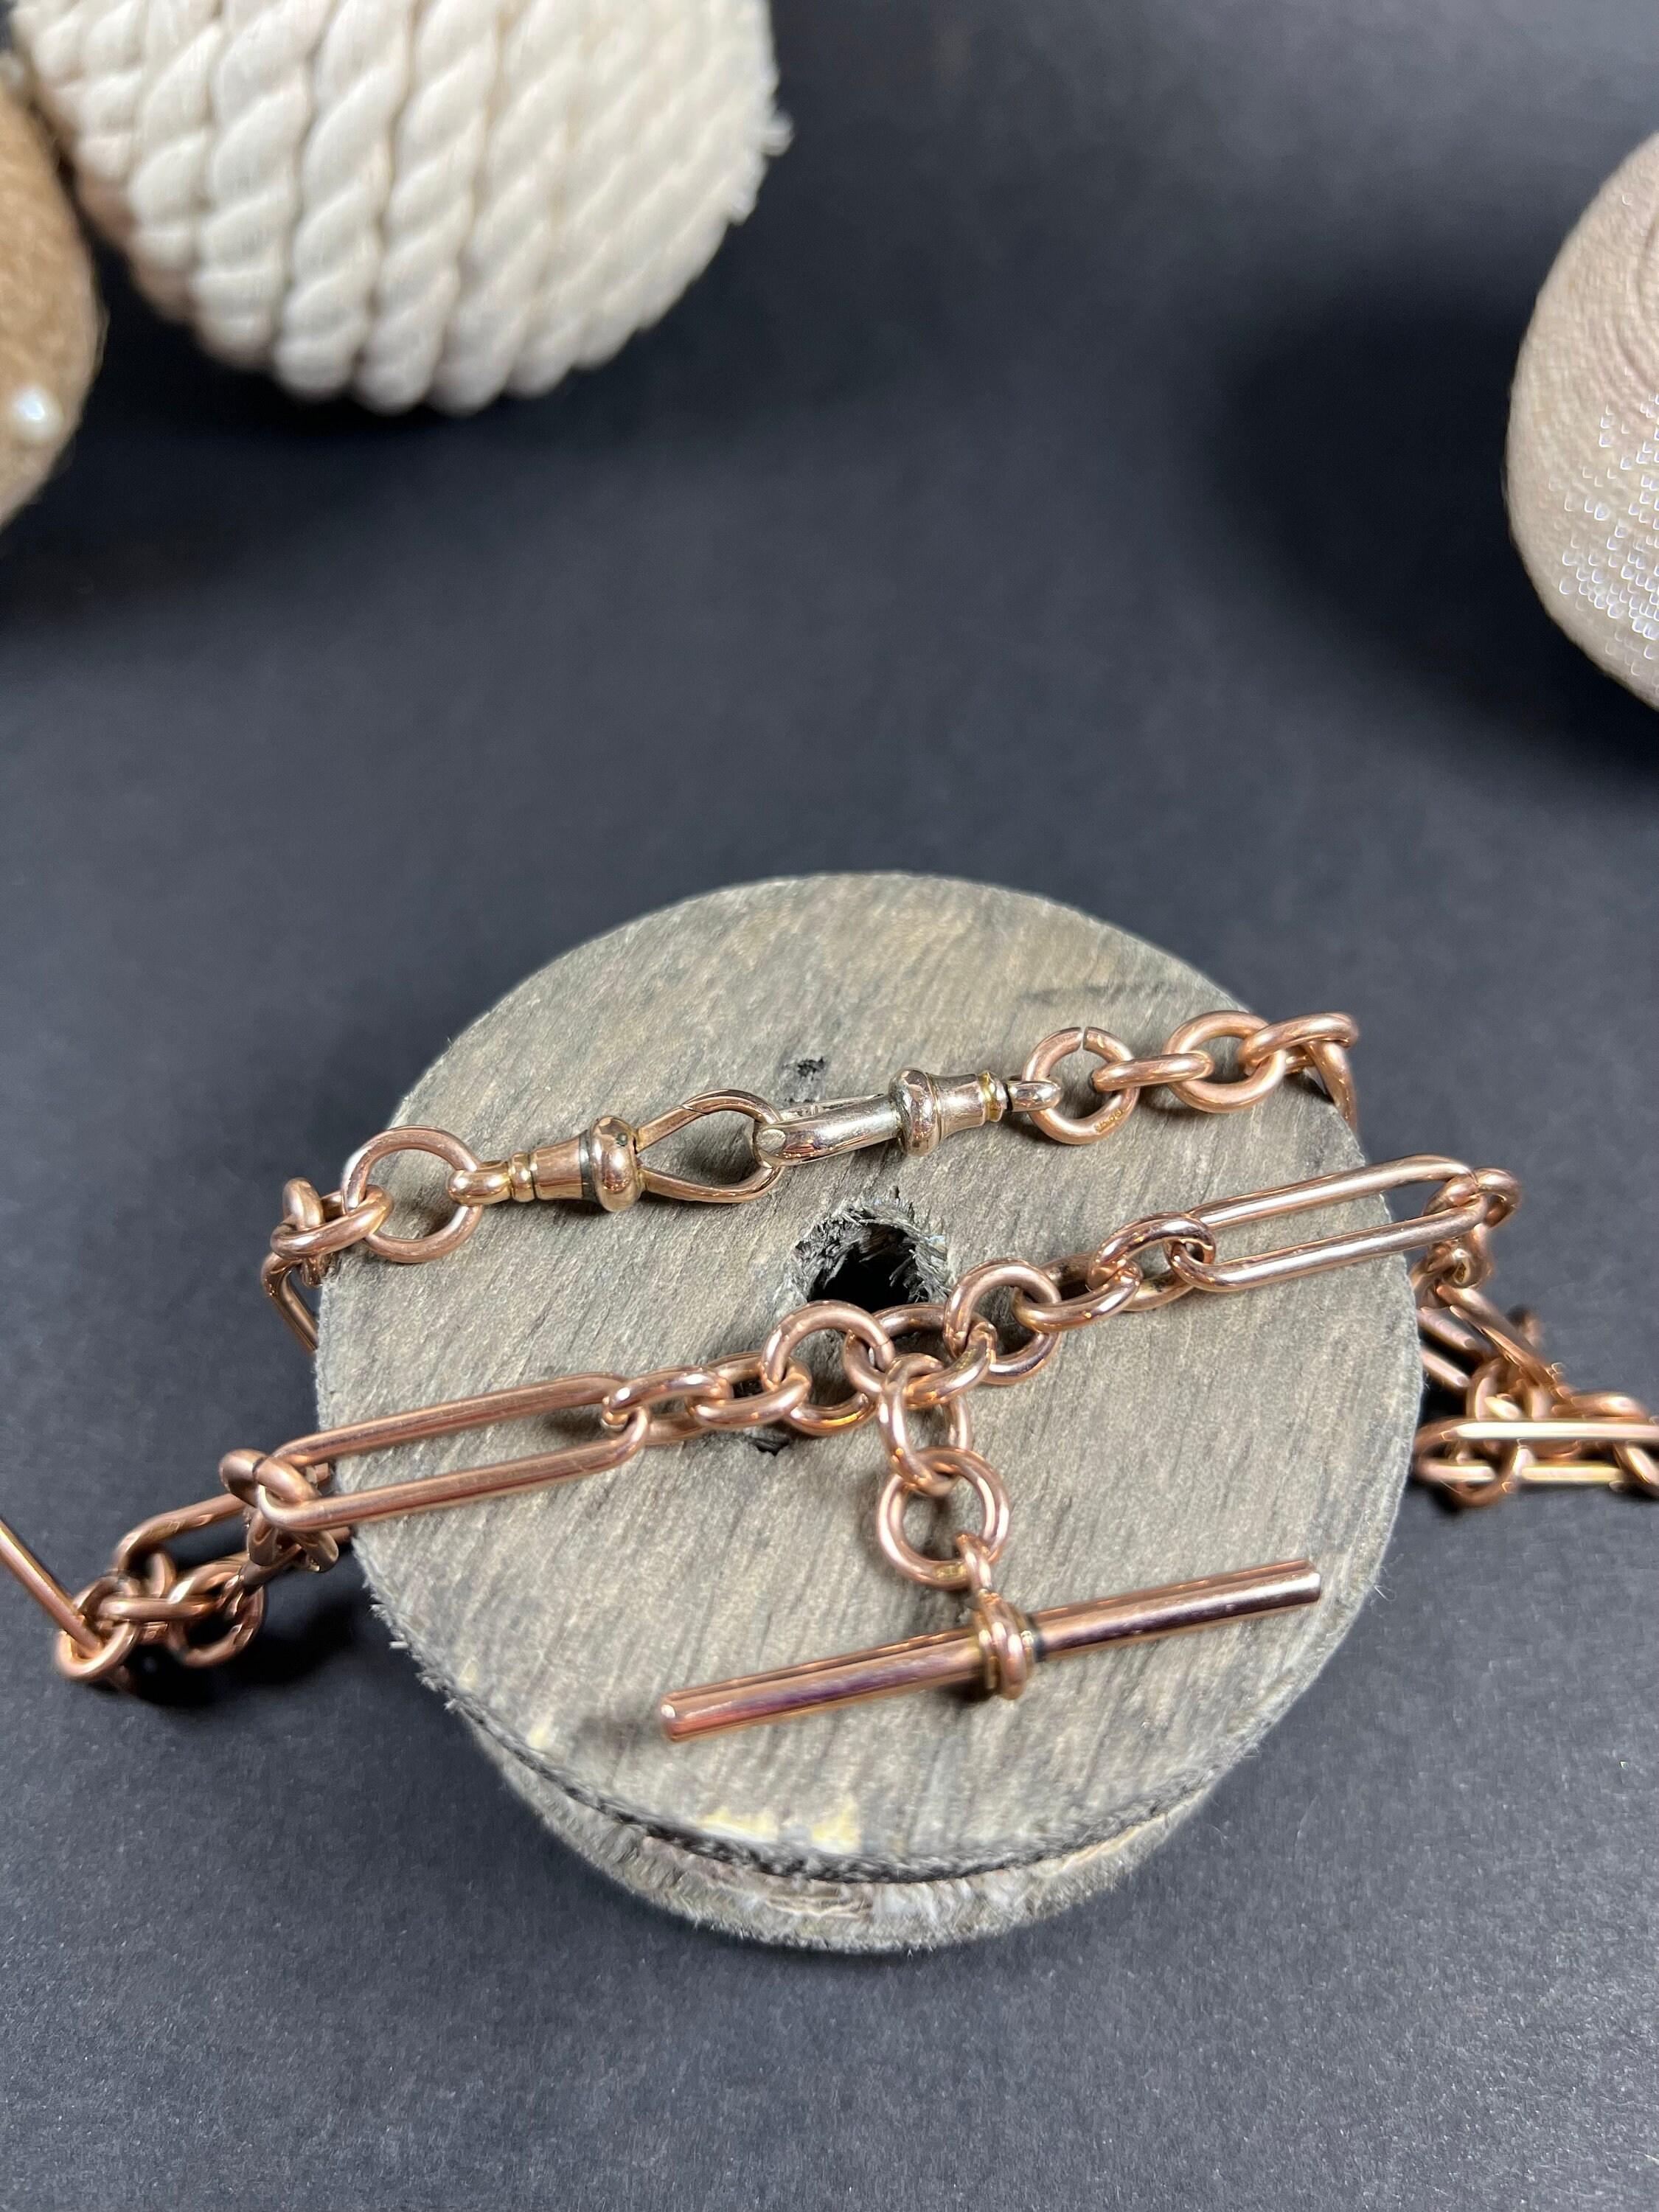 Antique Albert Chain

9ct Rose Gold Stamped 

Hallmarked Chester 1888

This exquisite Victorian-era Albert chain is a true masterpiece crafted from 9ct rose gold. It boasts long trombone-style links joined by three oval links- each stamped 9 375,